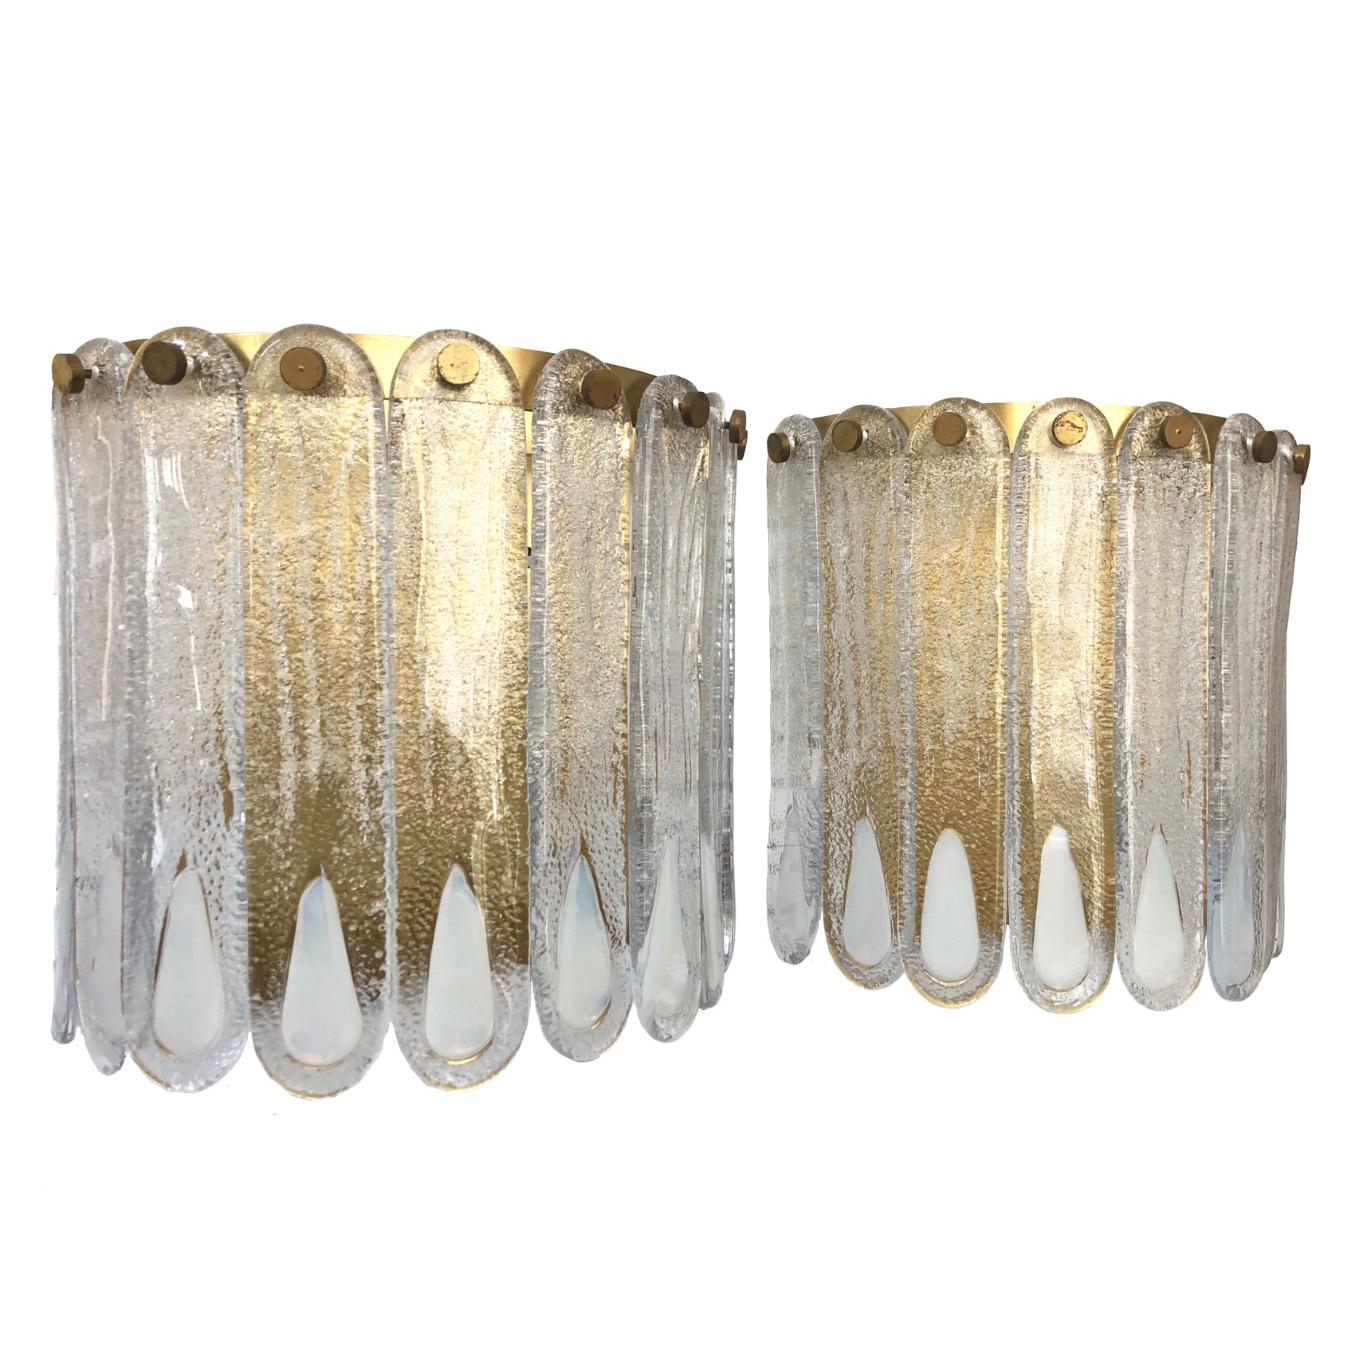 Marvelous and huge Italian Murano glass midcentury wall sconces.
These pieces were made during the 1970s in Italy for the Venice company “Mazzega”.
Each wall sconce is composed by 9 units of white Murano glasses (H 11.81 in. 30 cm x W 1.97 in. 5